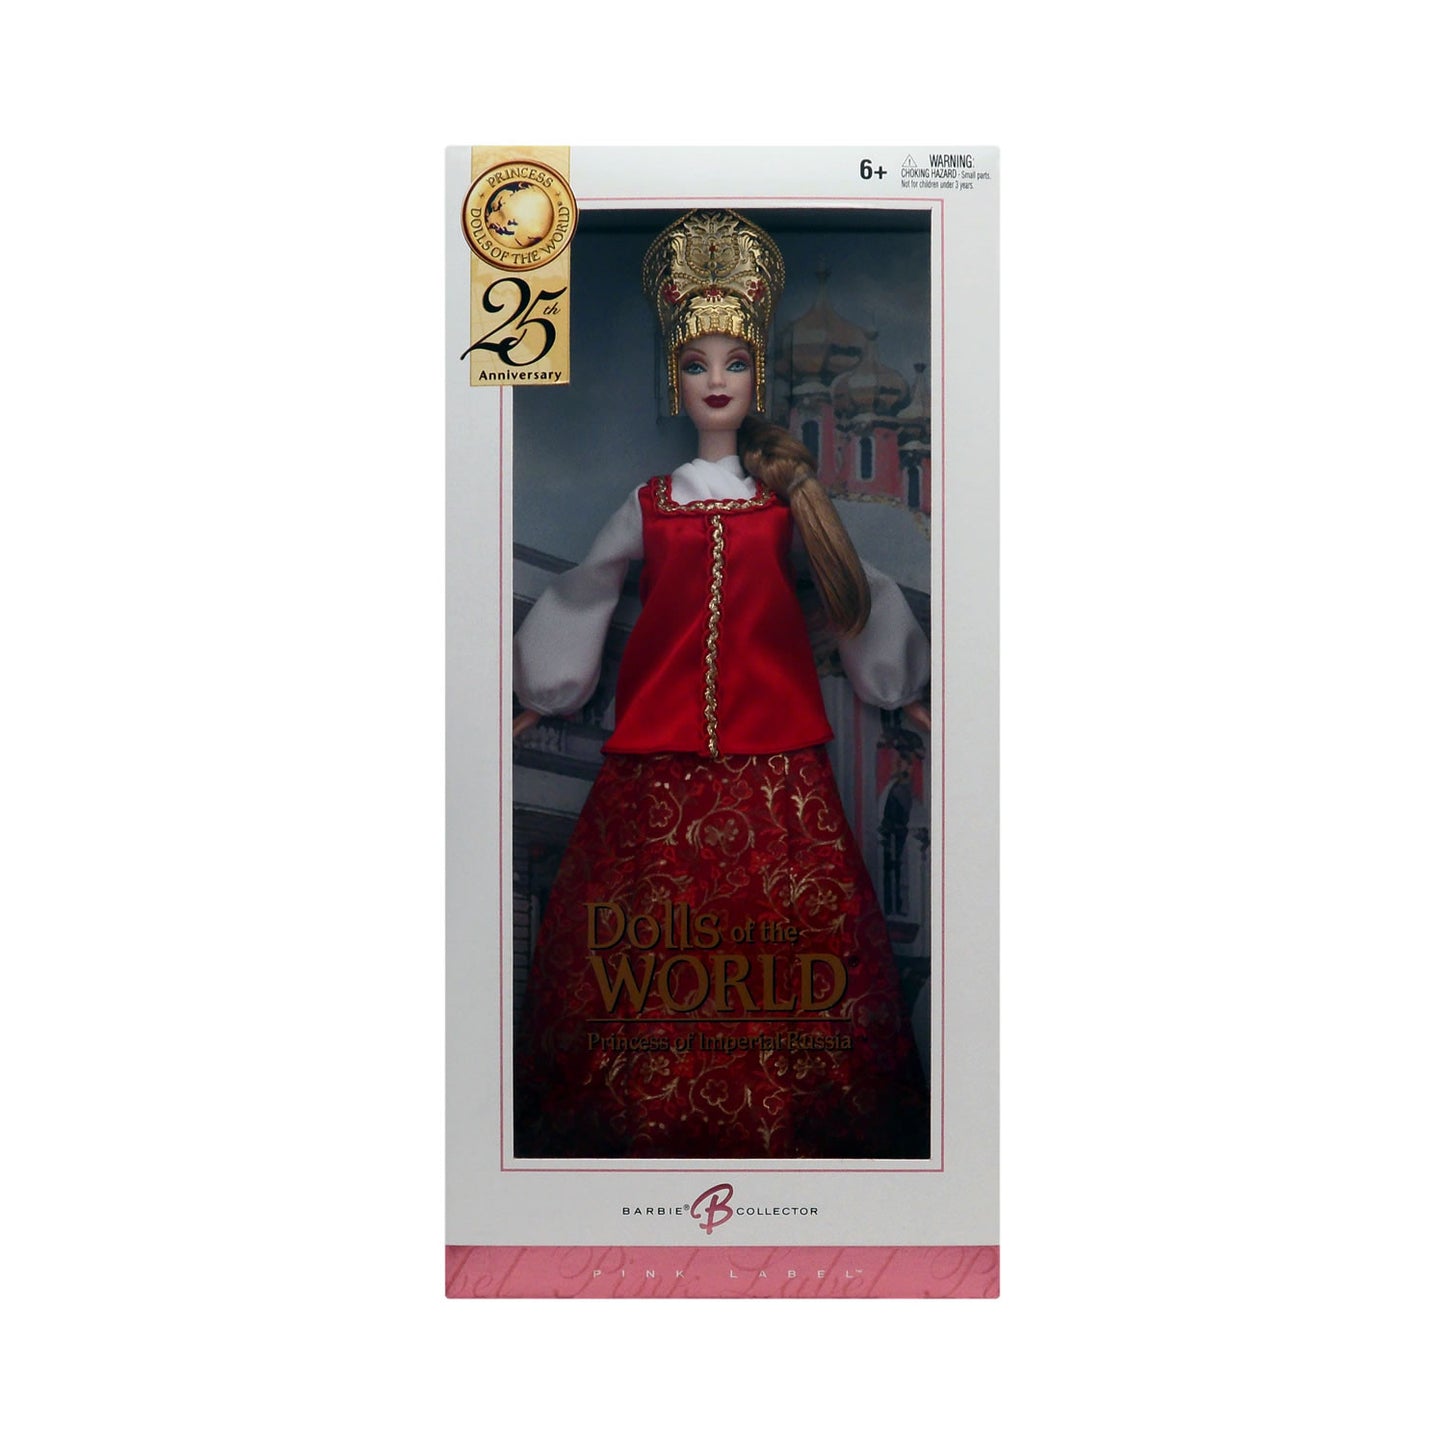 Dolls of the World Princess of Imperial Russia Barbie